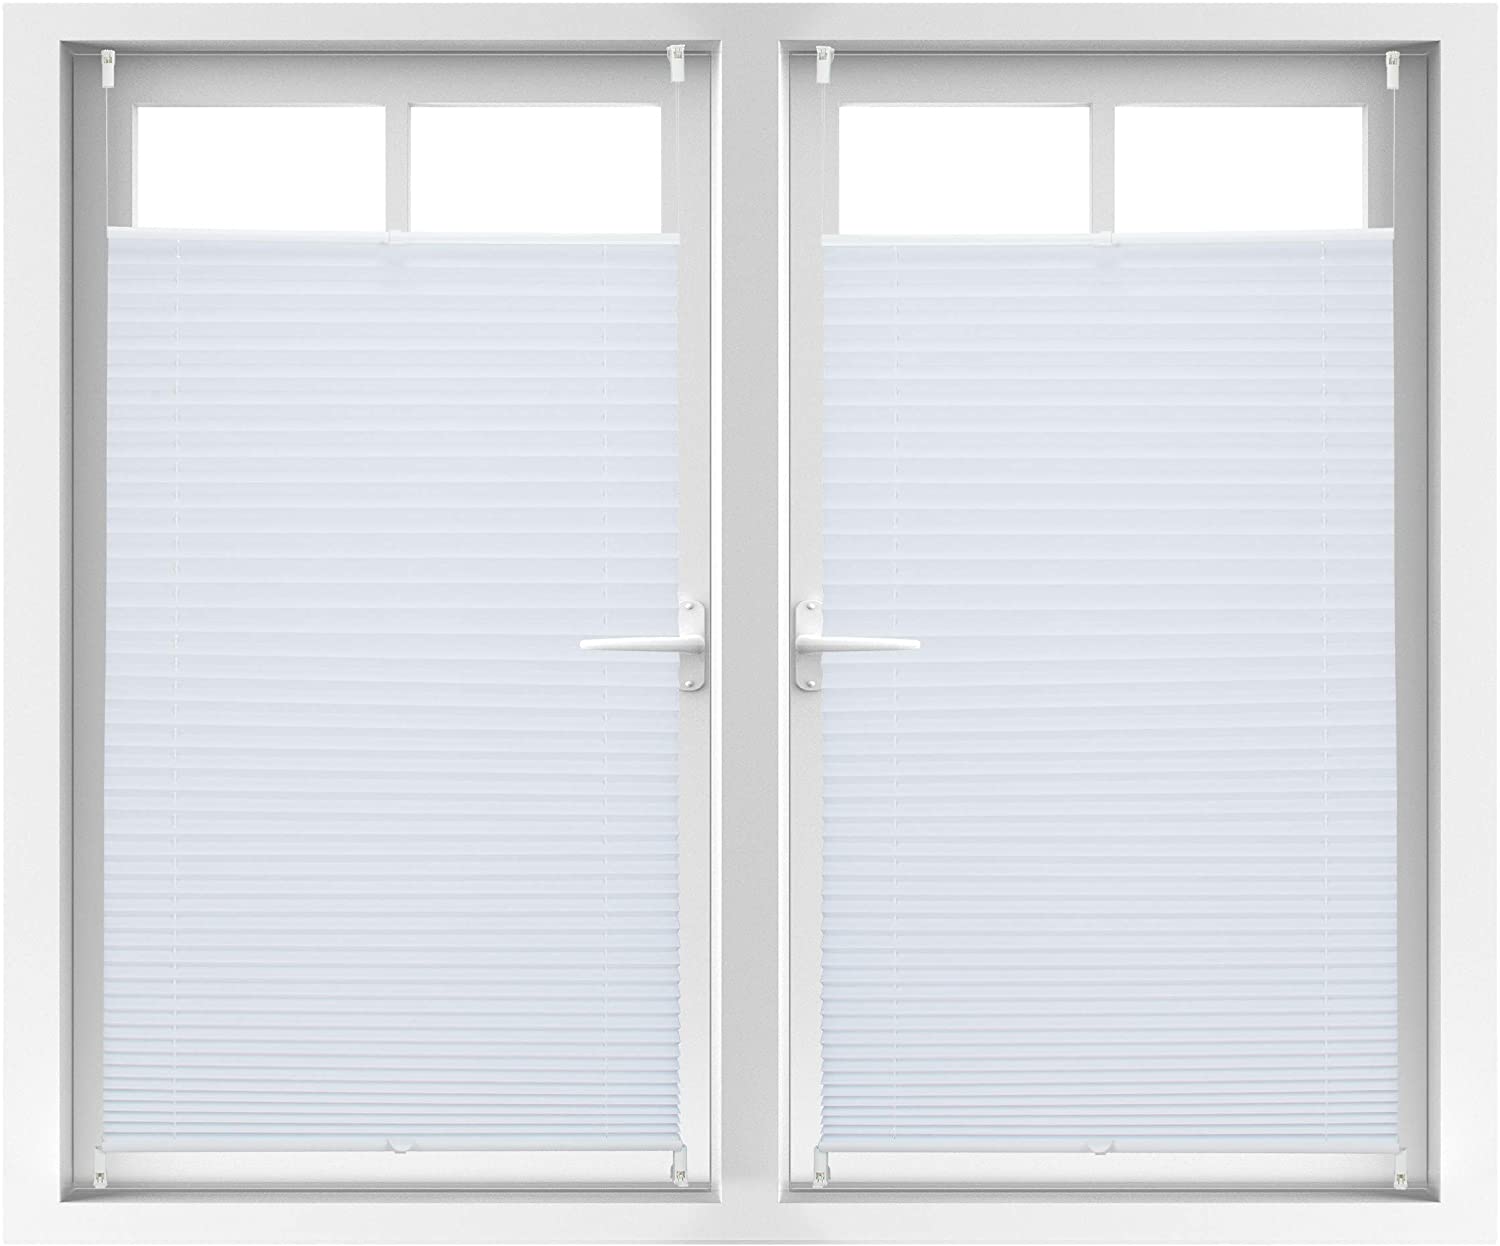 2X Pleated Blind Klemmfix Without Drilling, Stick-On, Folding Blind Blind W